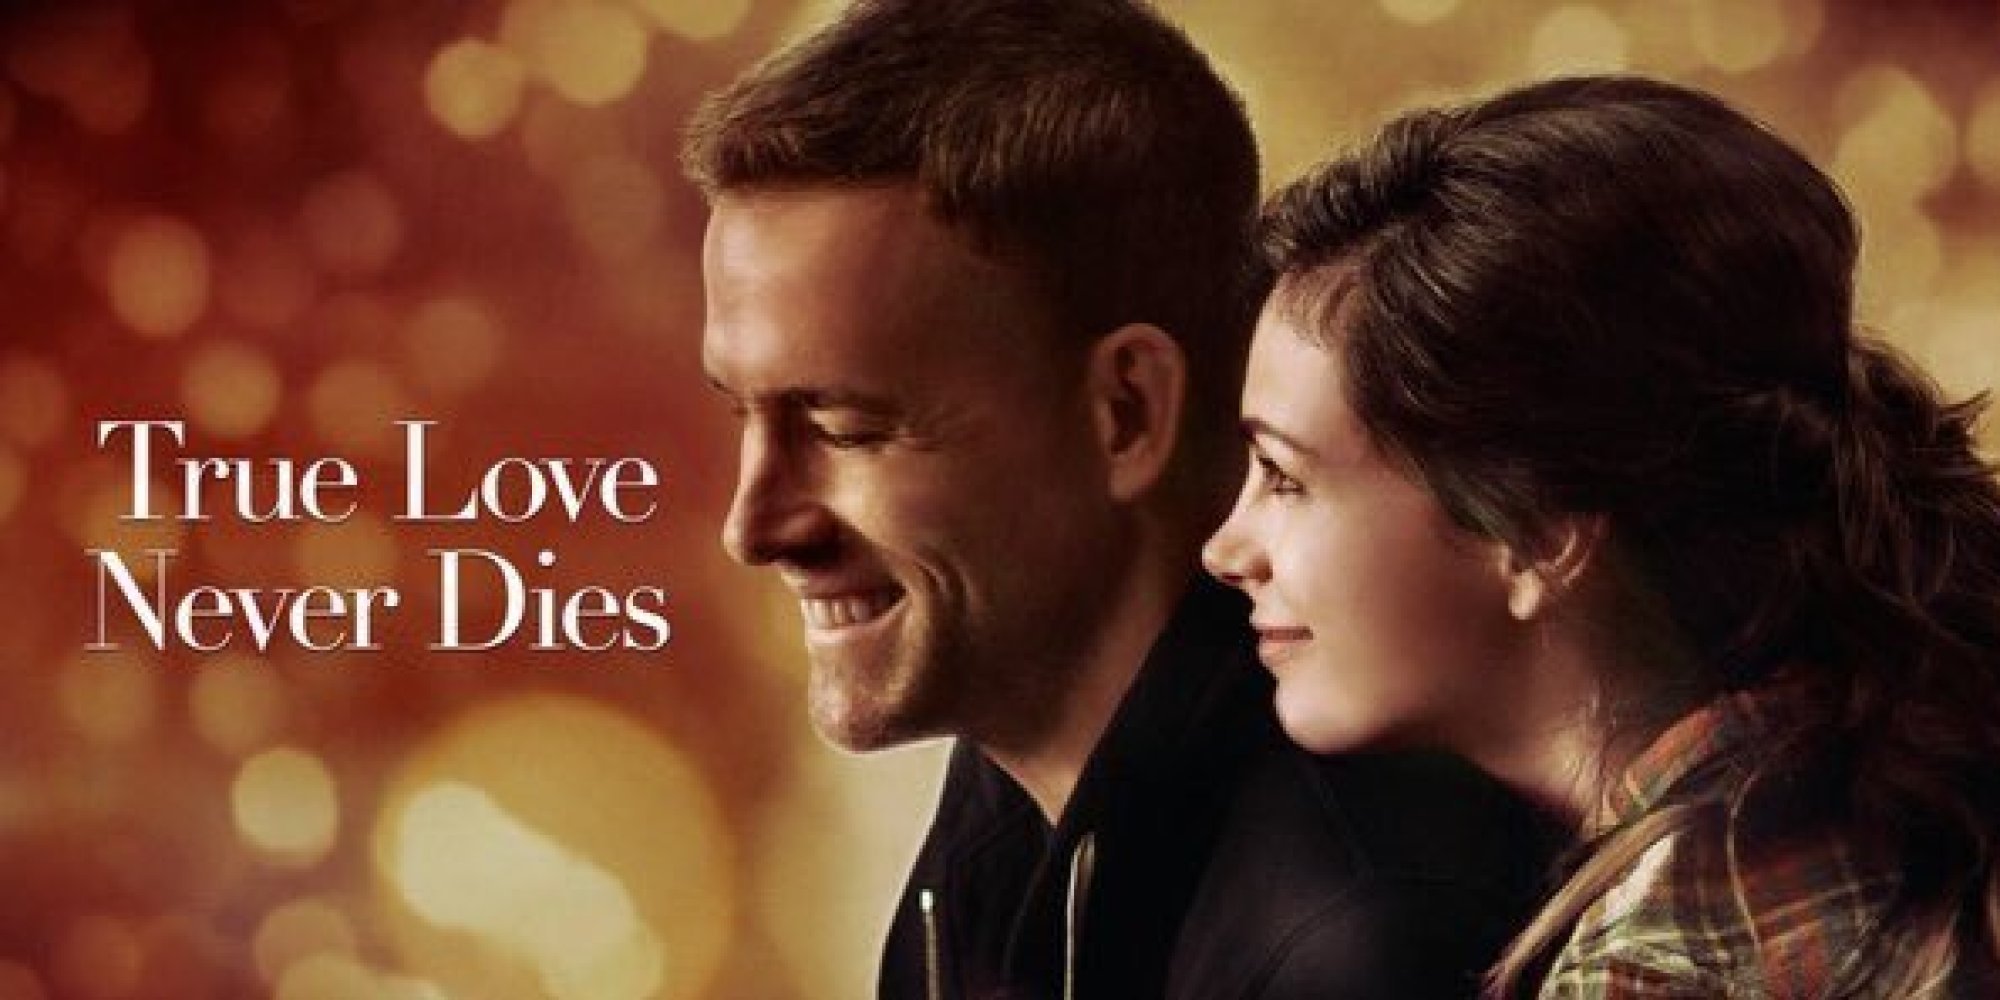 It s a never love. Valentine's Day movie poster. Movie poster Valentine's Day Alba. The Light between Oceans movie posters.